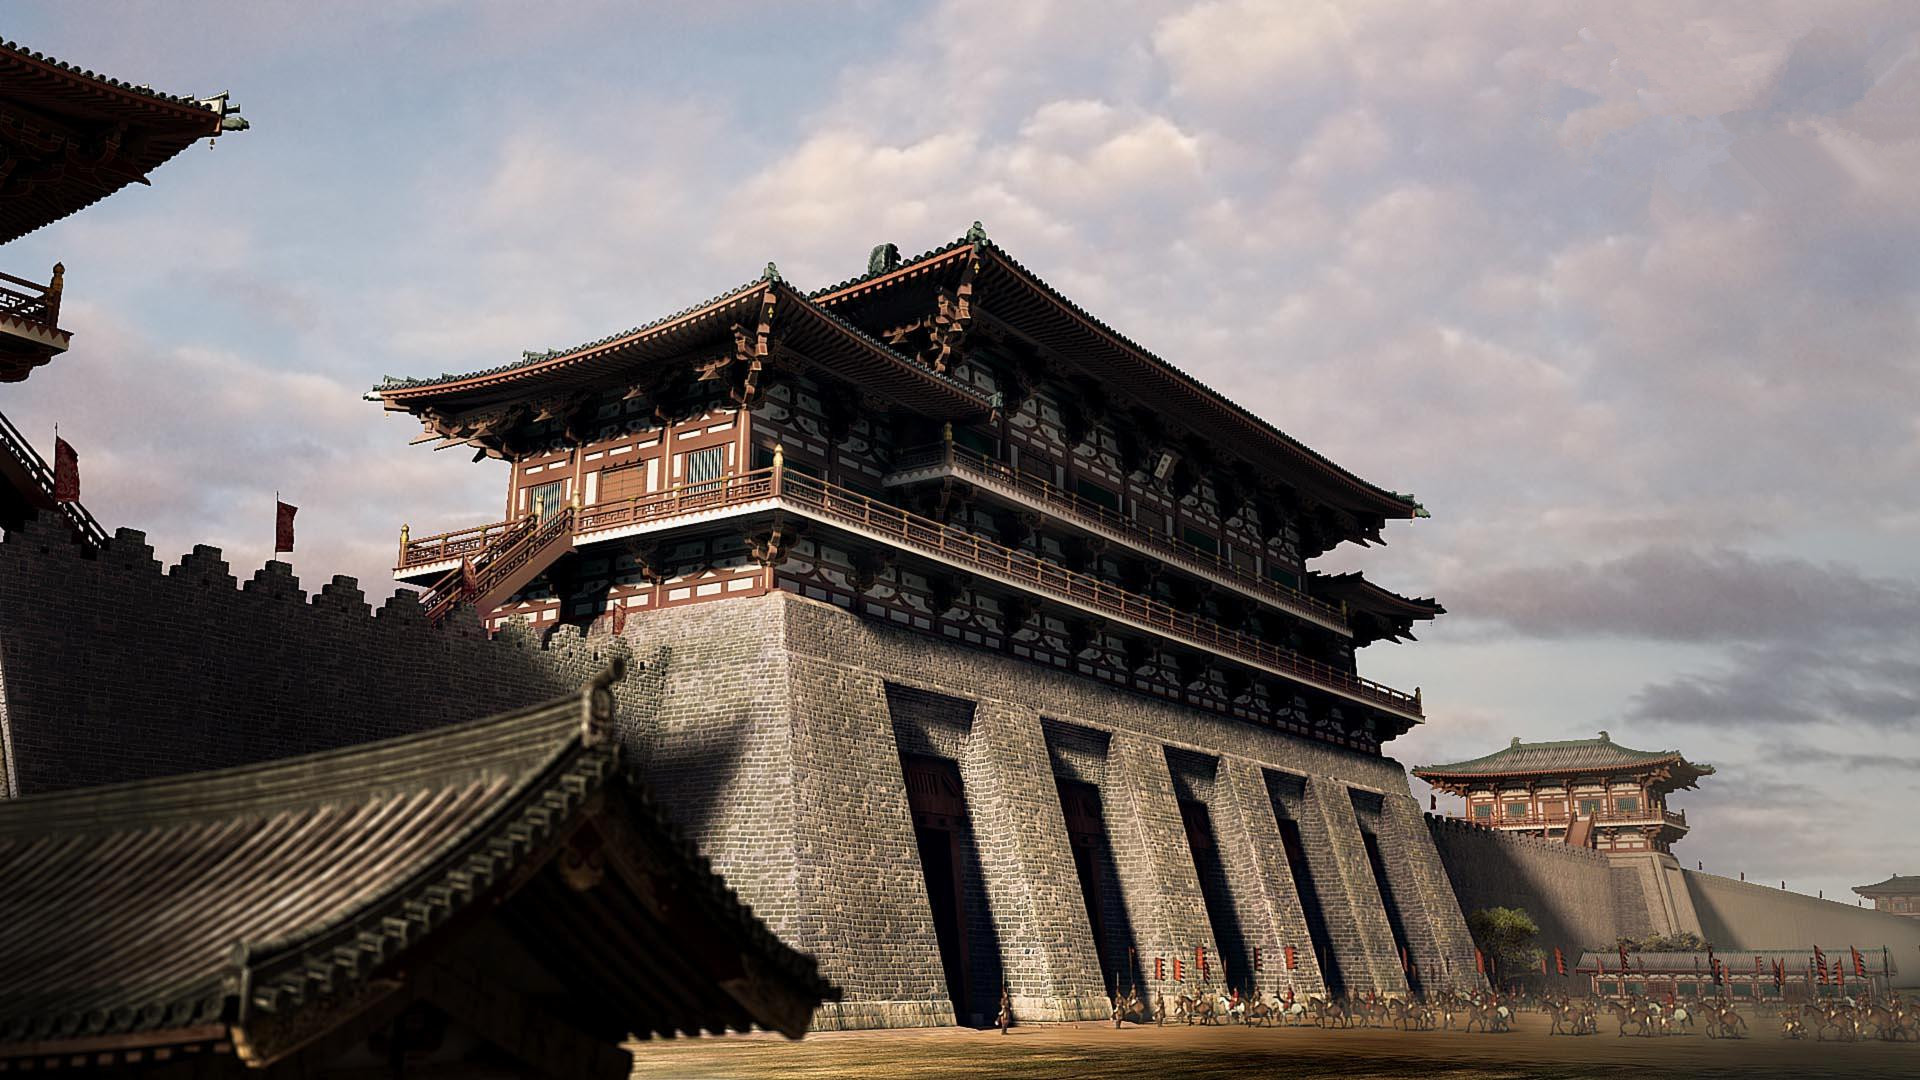 General 1920x1080 palace Chinese architecture architecture building sky clouds